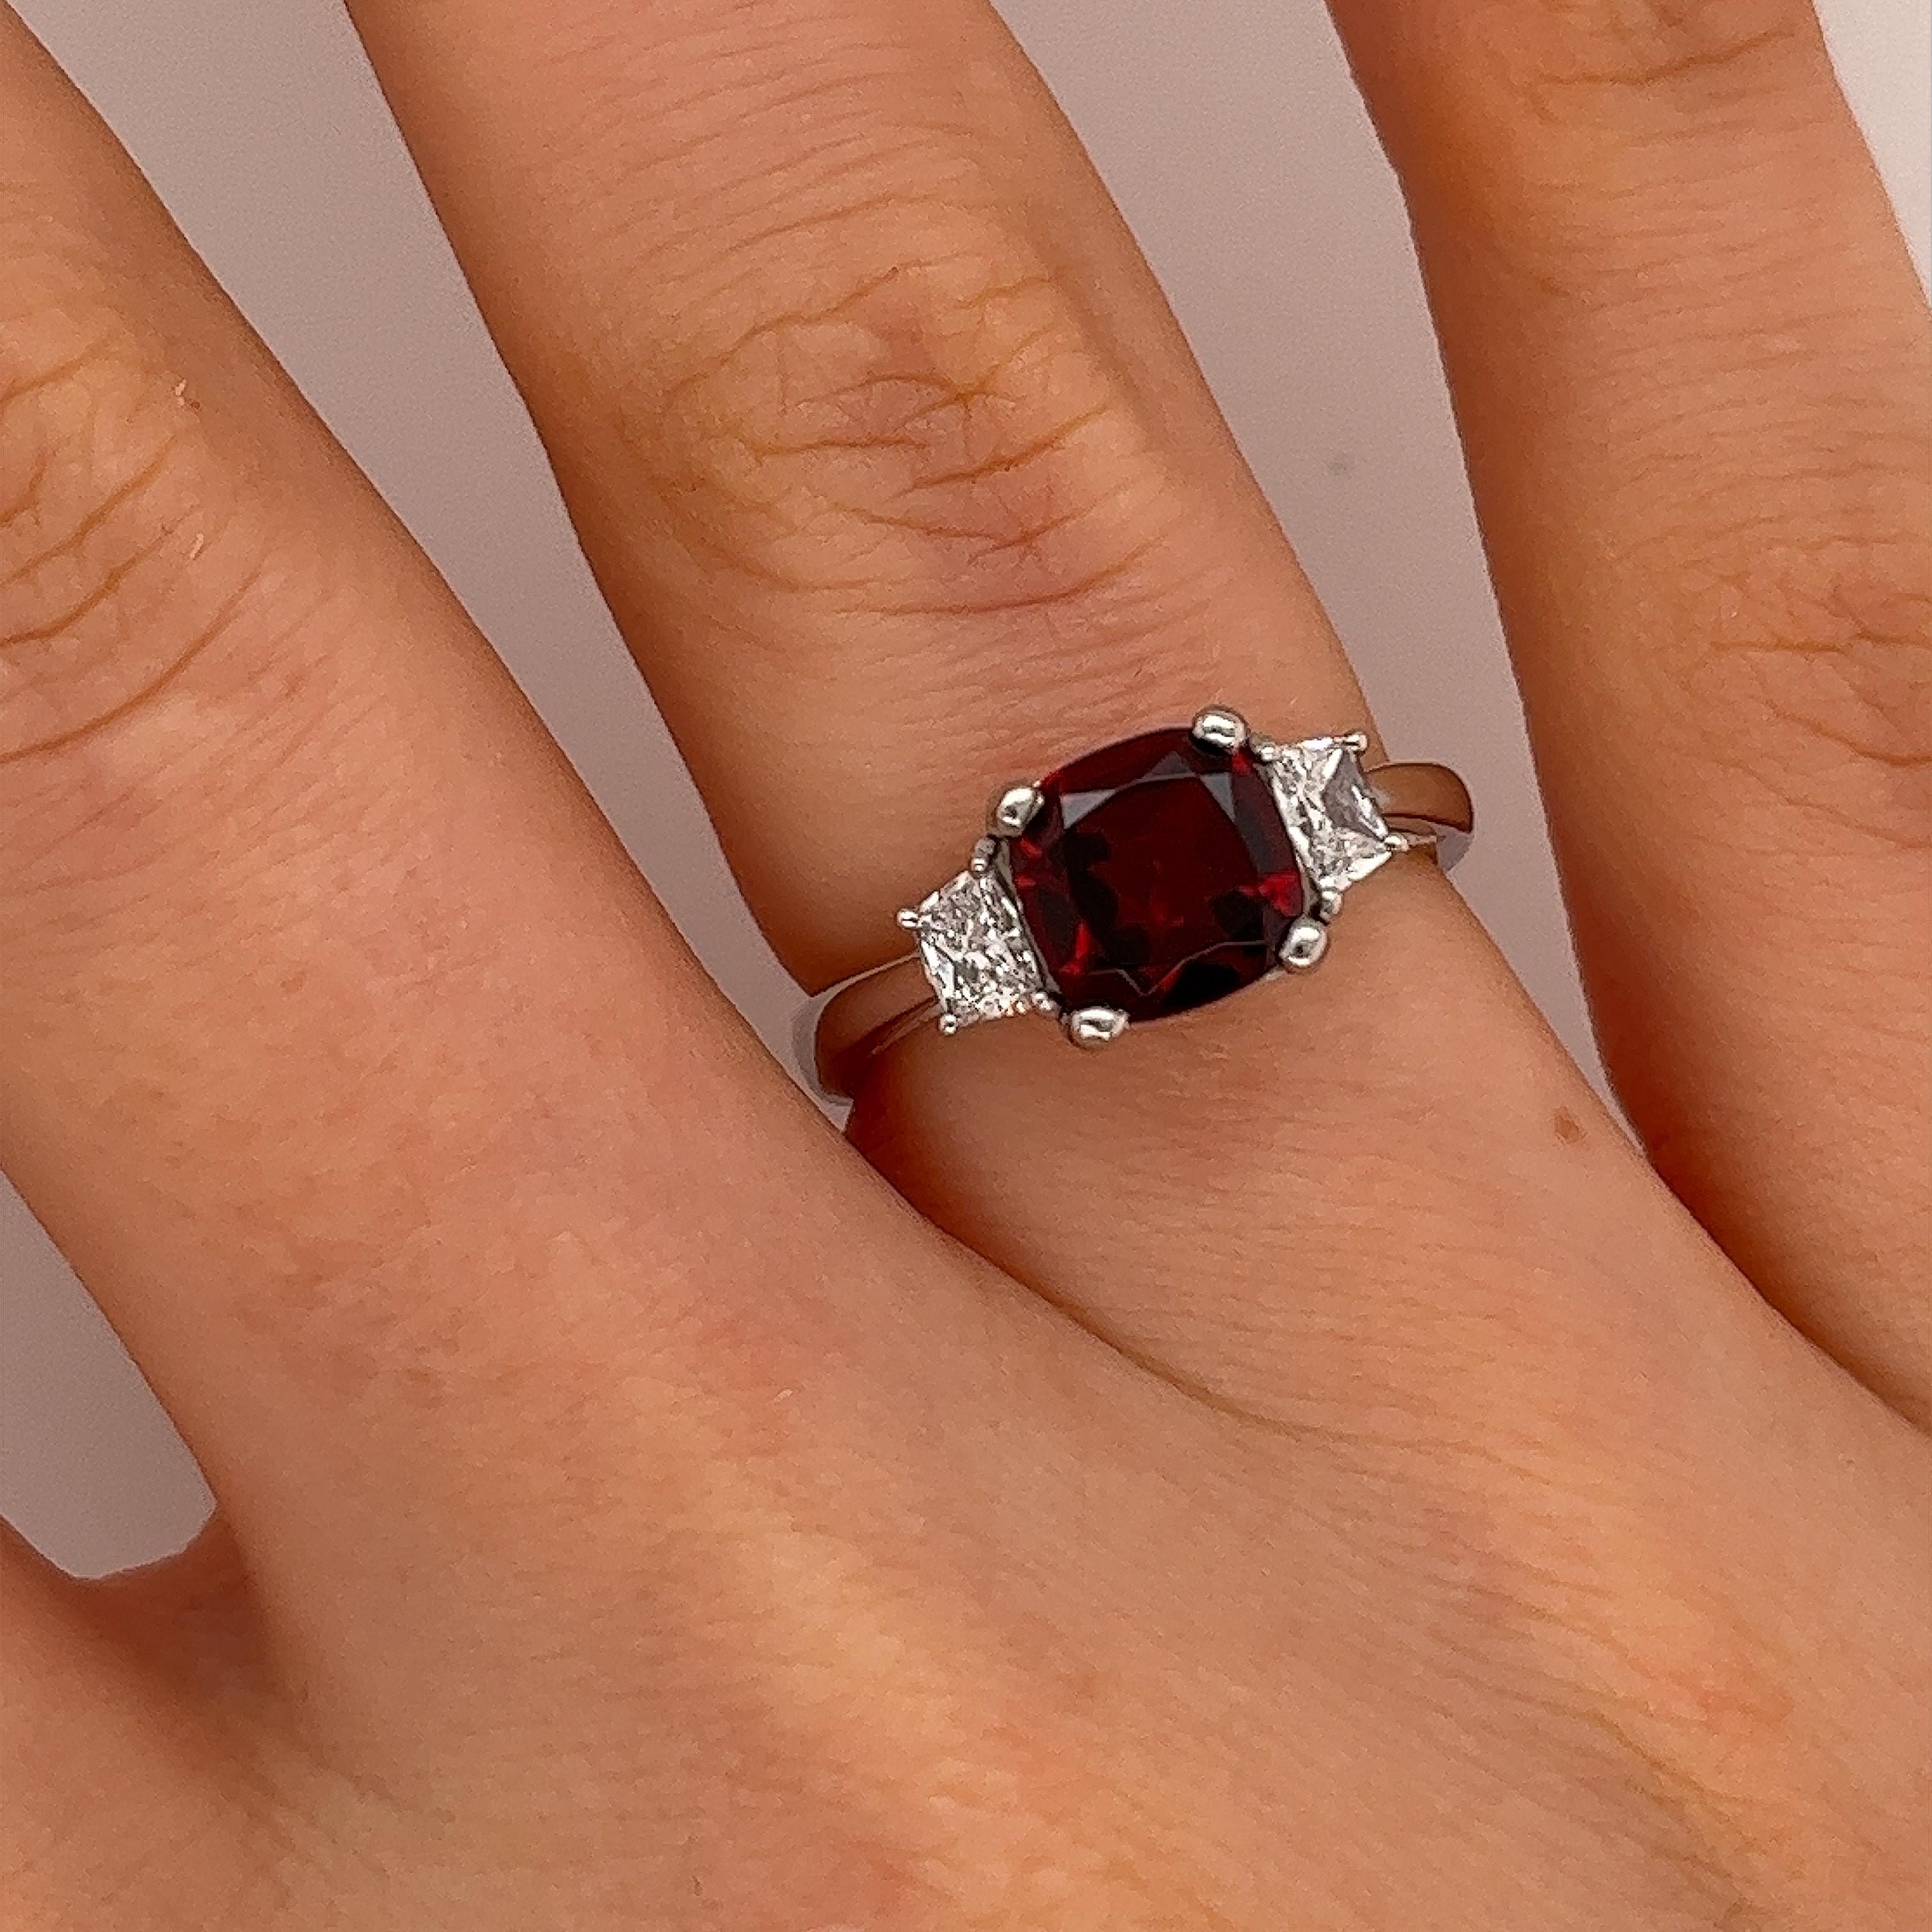 An elegant and unique 1.88ct garnet and diamond ring, 
set with 2 tapered natural diamonds 0.33ct,
in a platinum beautiful setting.

Width of Band: 3.05mm
Width of Head: 7.47mm
Length of Head: 13.53mm
Total Weight: 6.10g
Ring Size: M
SMS9233